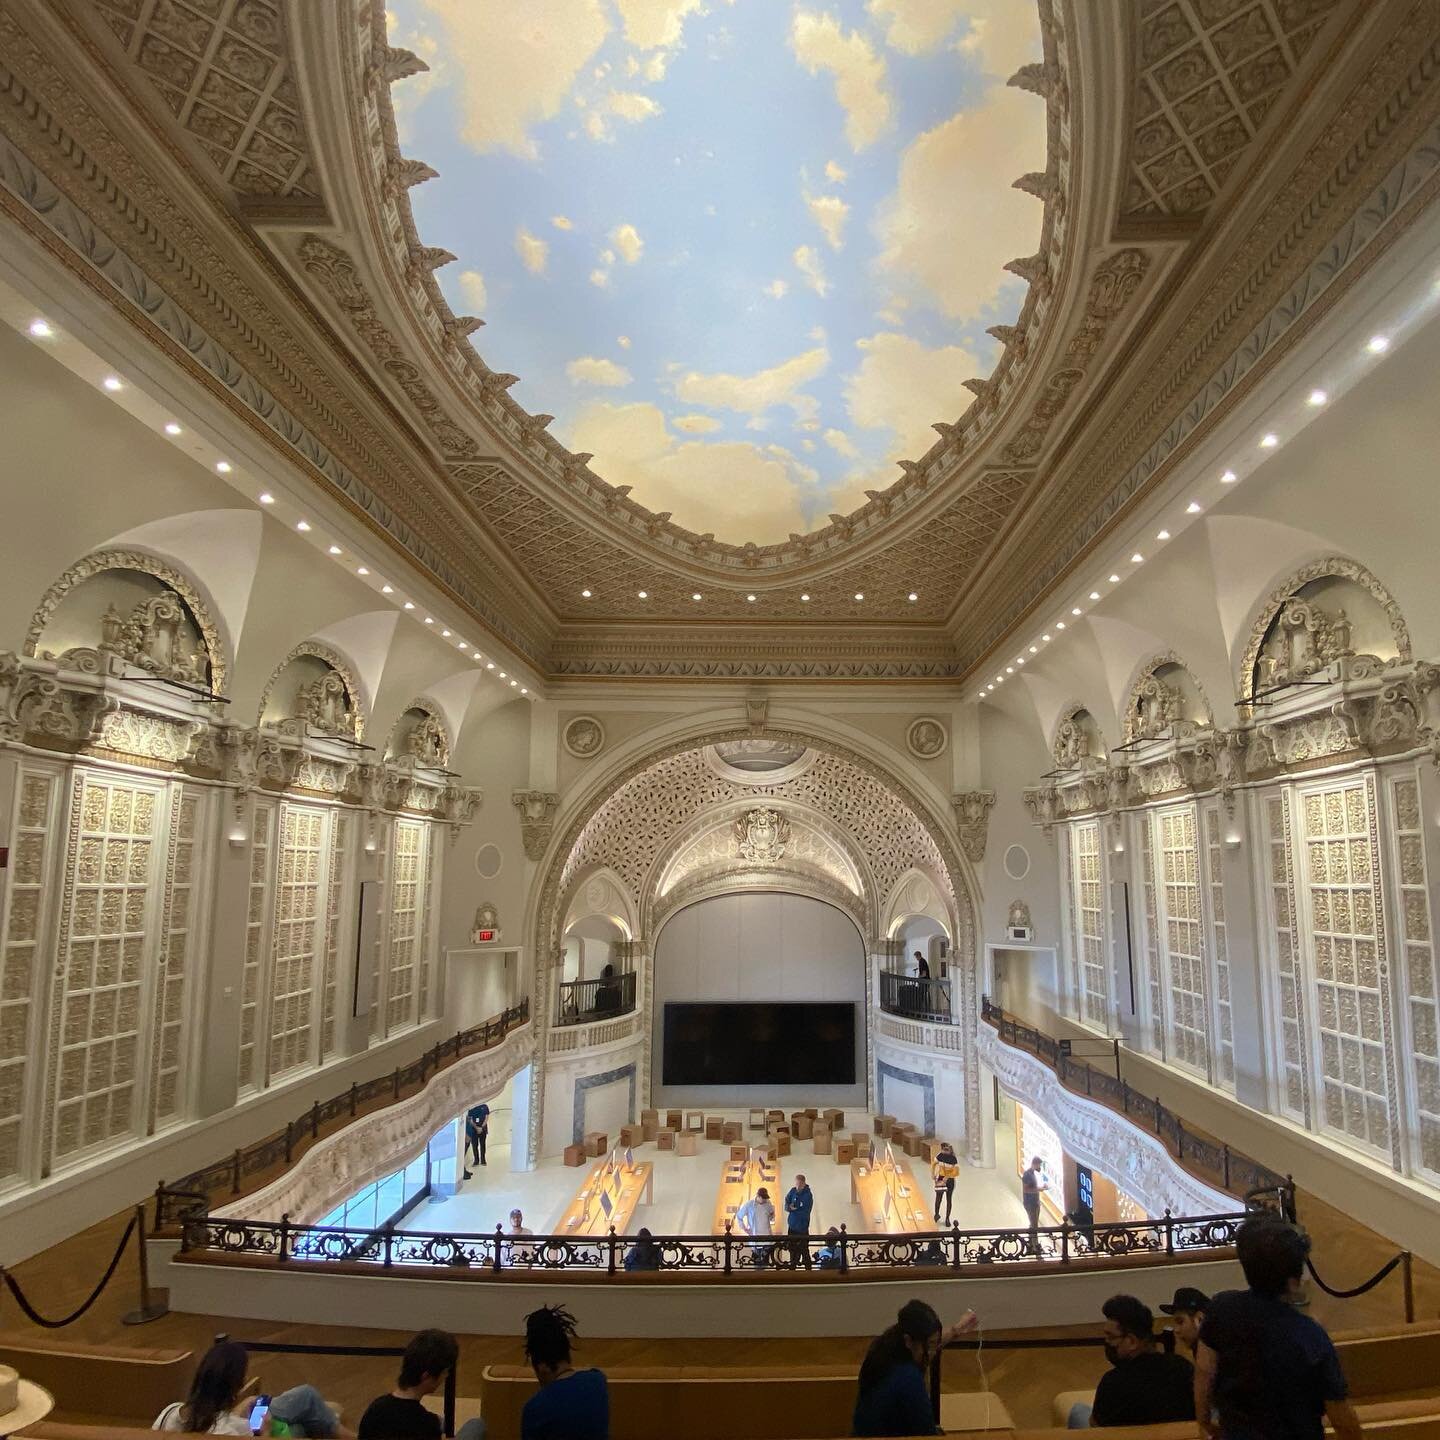 The new Apple Store at the historic Tower Theatre opened today in downtown Los Angeles. Full video coming soon! (link in bio) #appletowertheatre #applestore #apple #applelosangeles #dtla #downtownla #towertheater #towertheatre